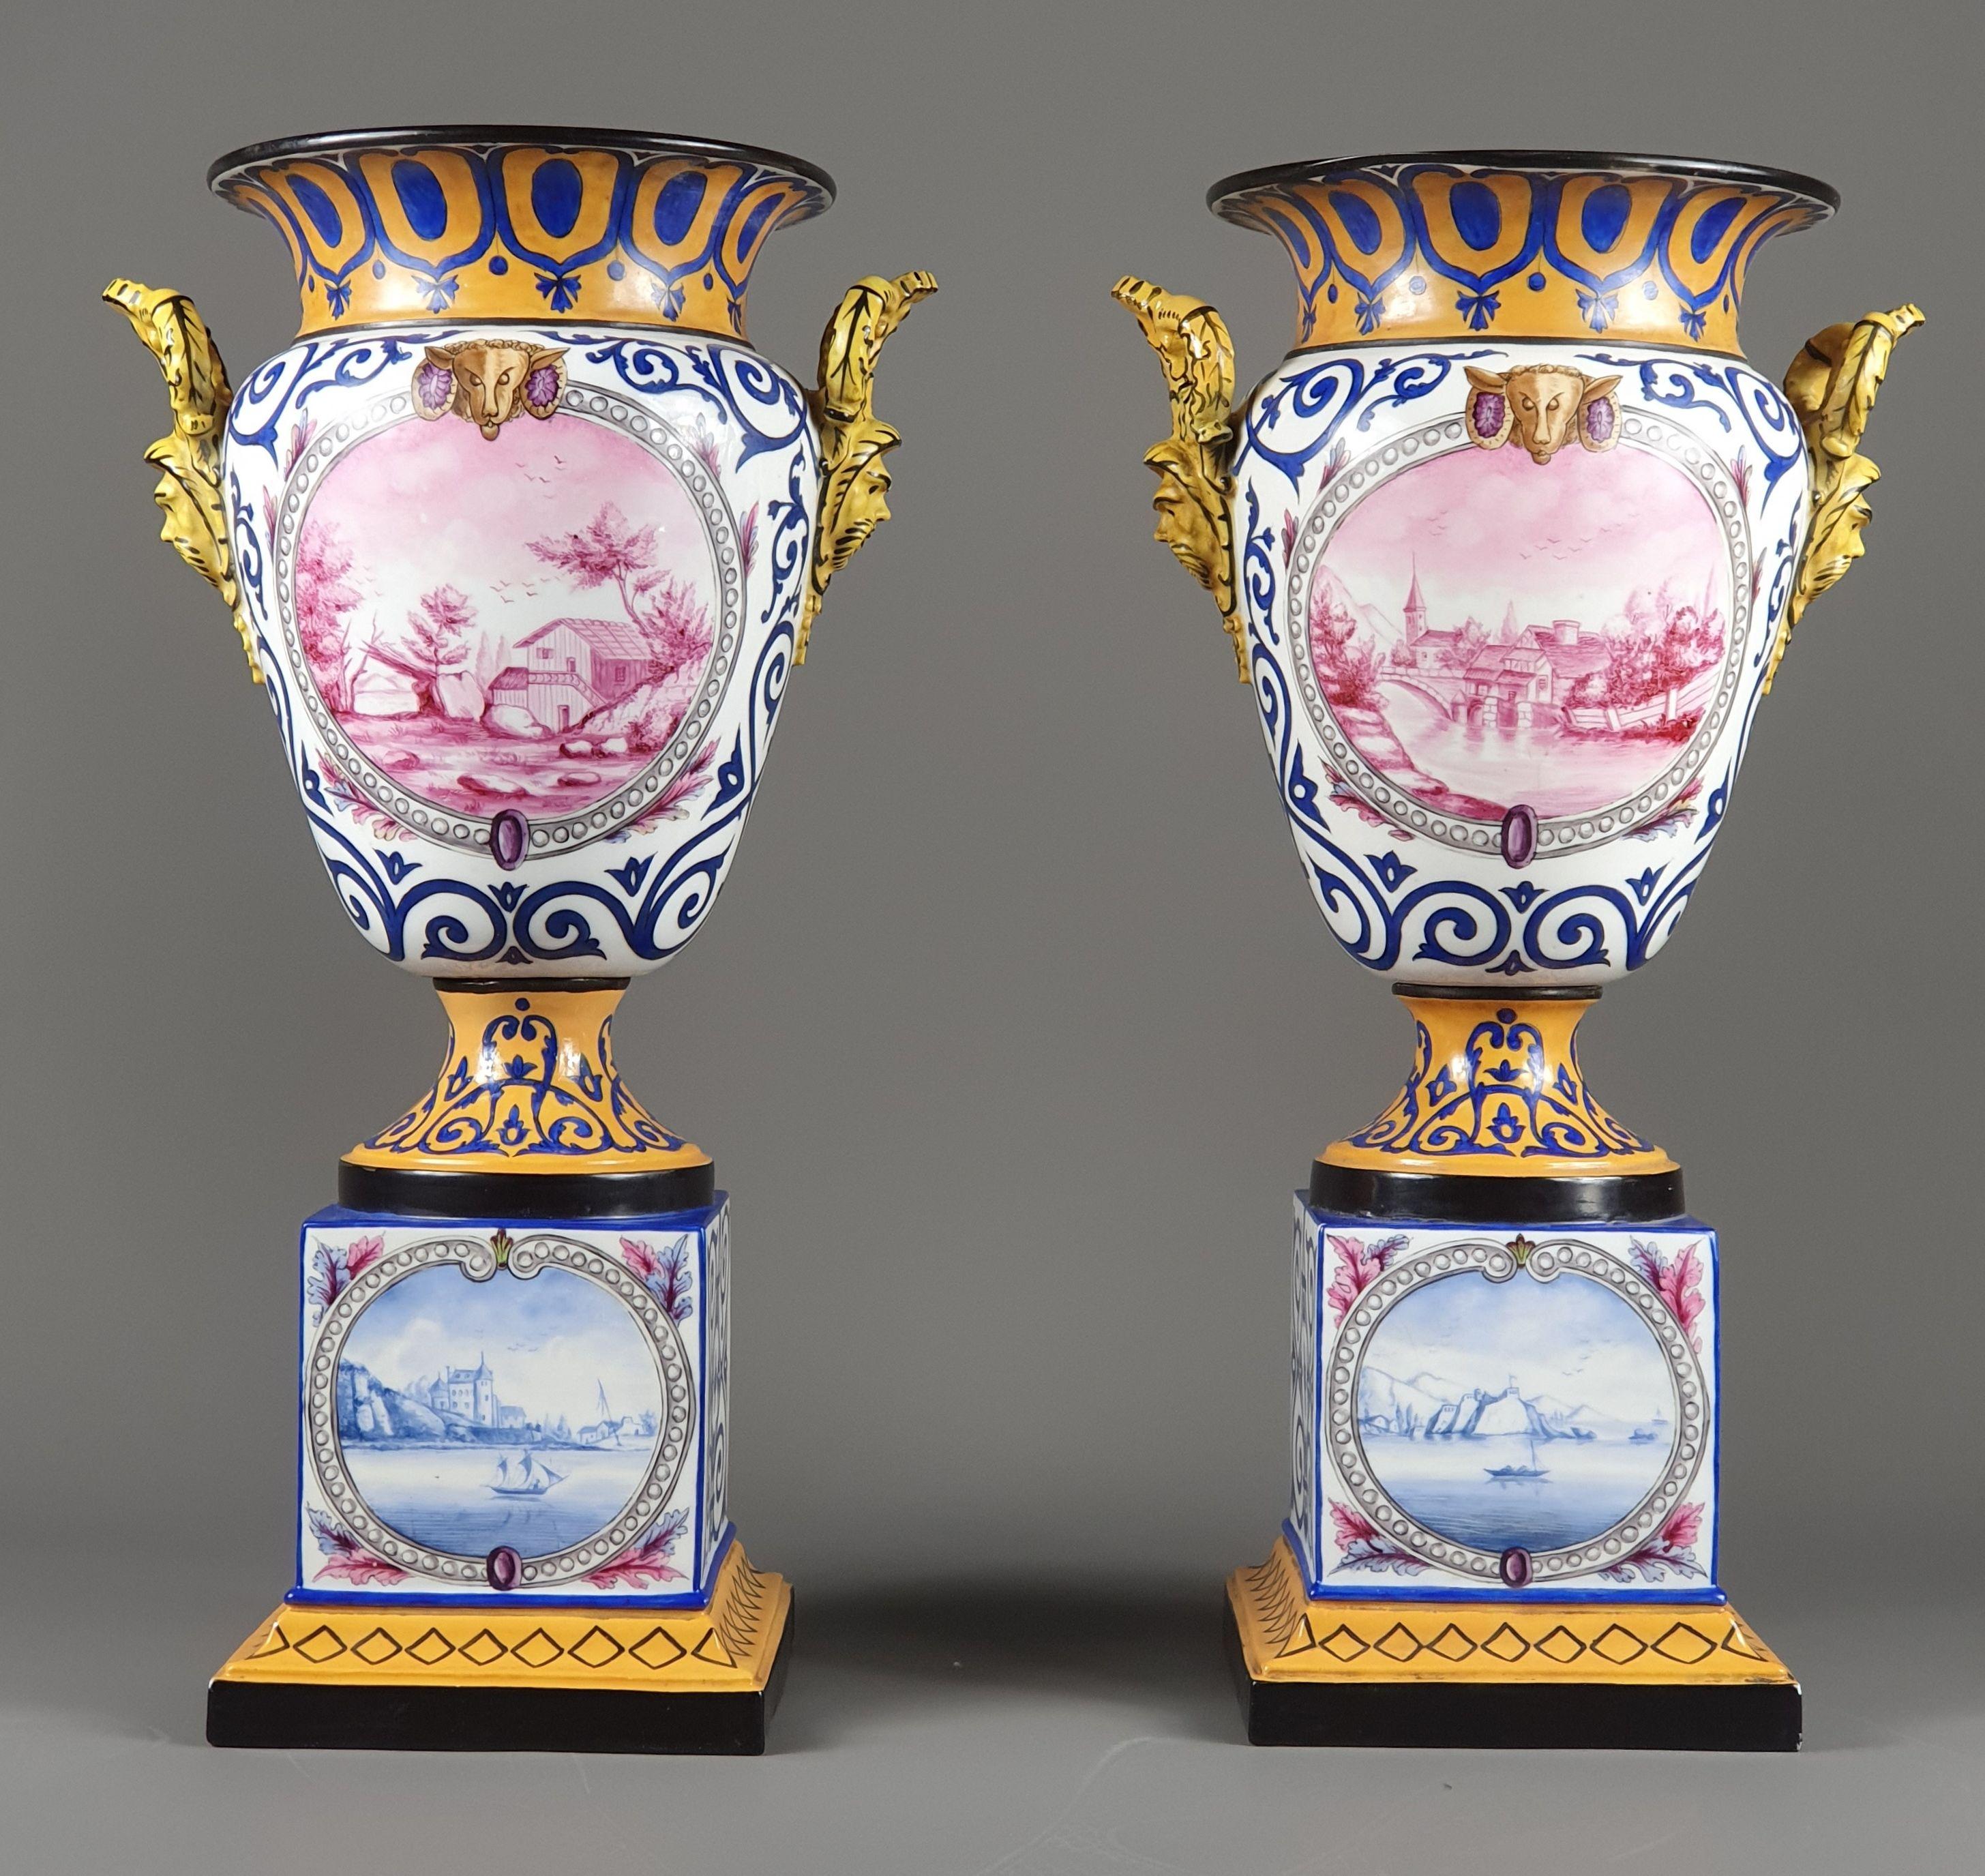 Rare pair of Paris porcelain vases composed of a cubic base on a flared base and surmounted by a Medicis style vase with a generous belly.

Superb decor on an orange and white background adorned with navy-colored foliage presenting different